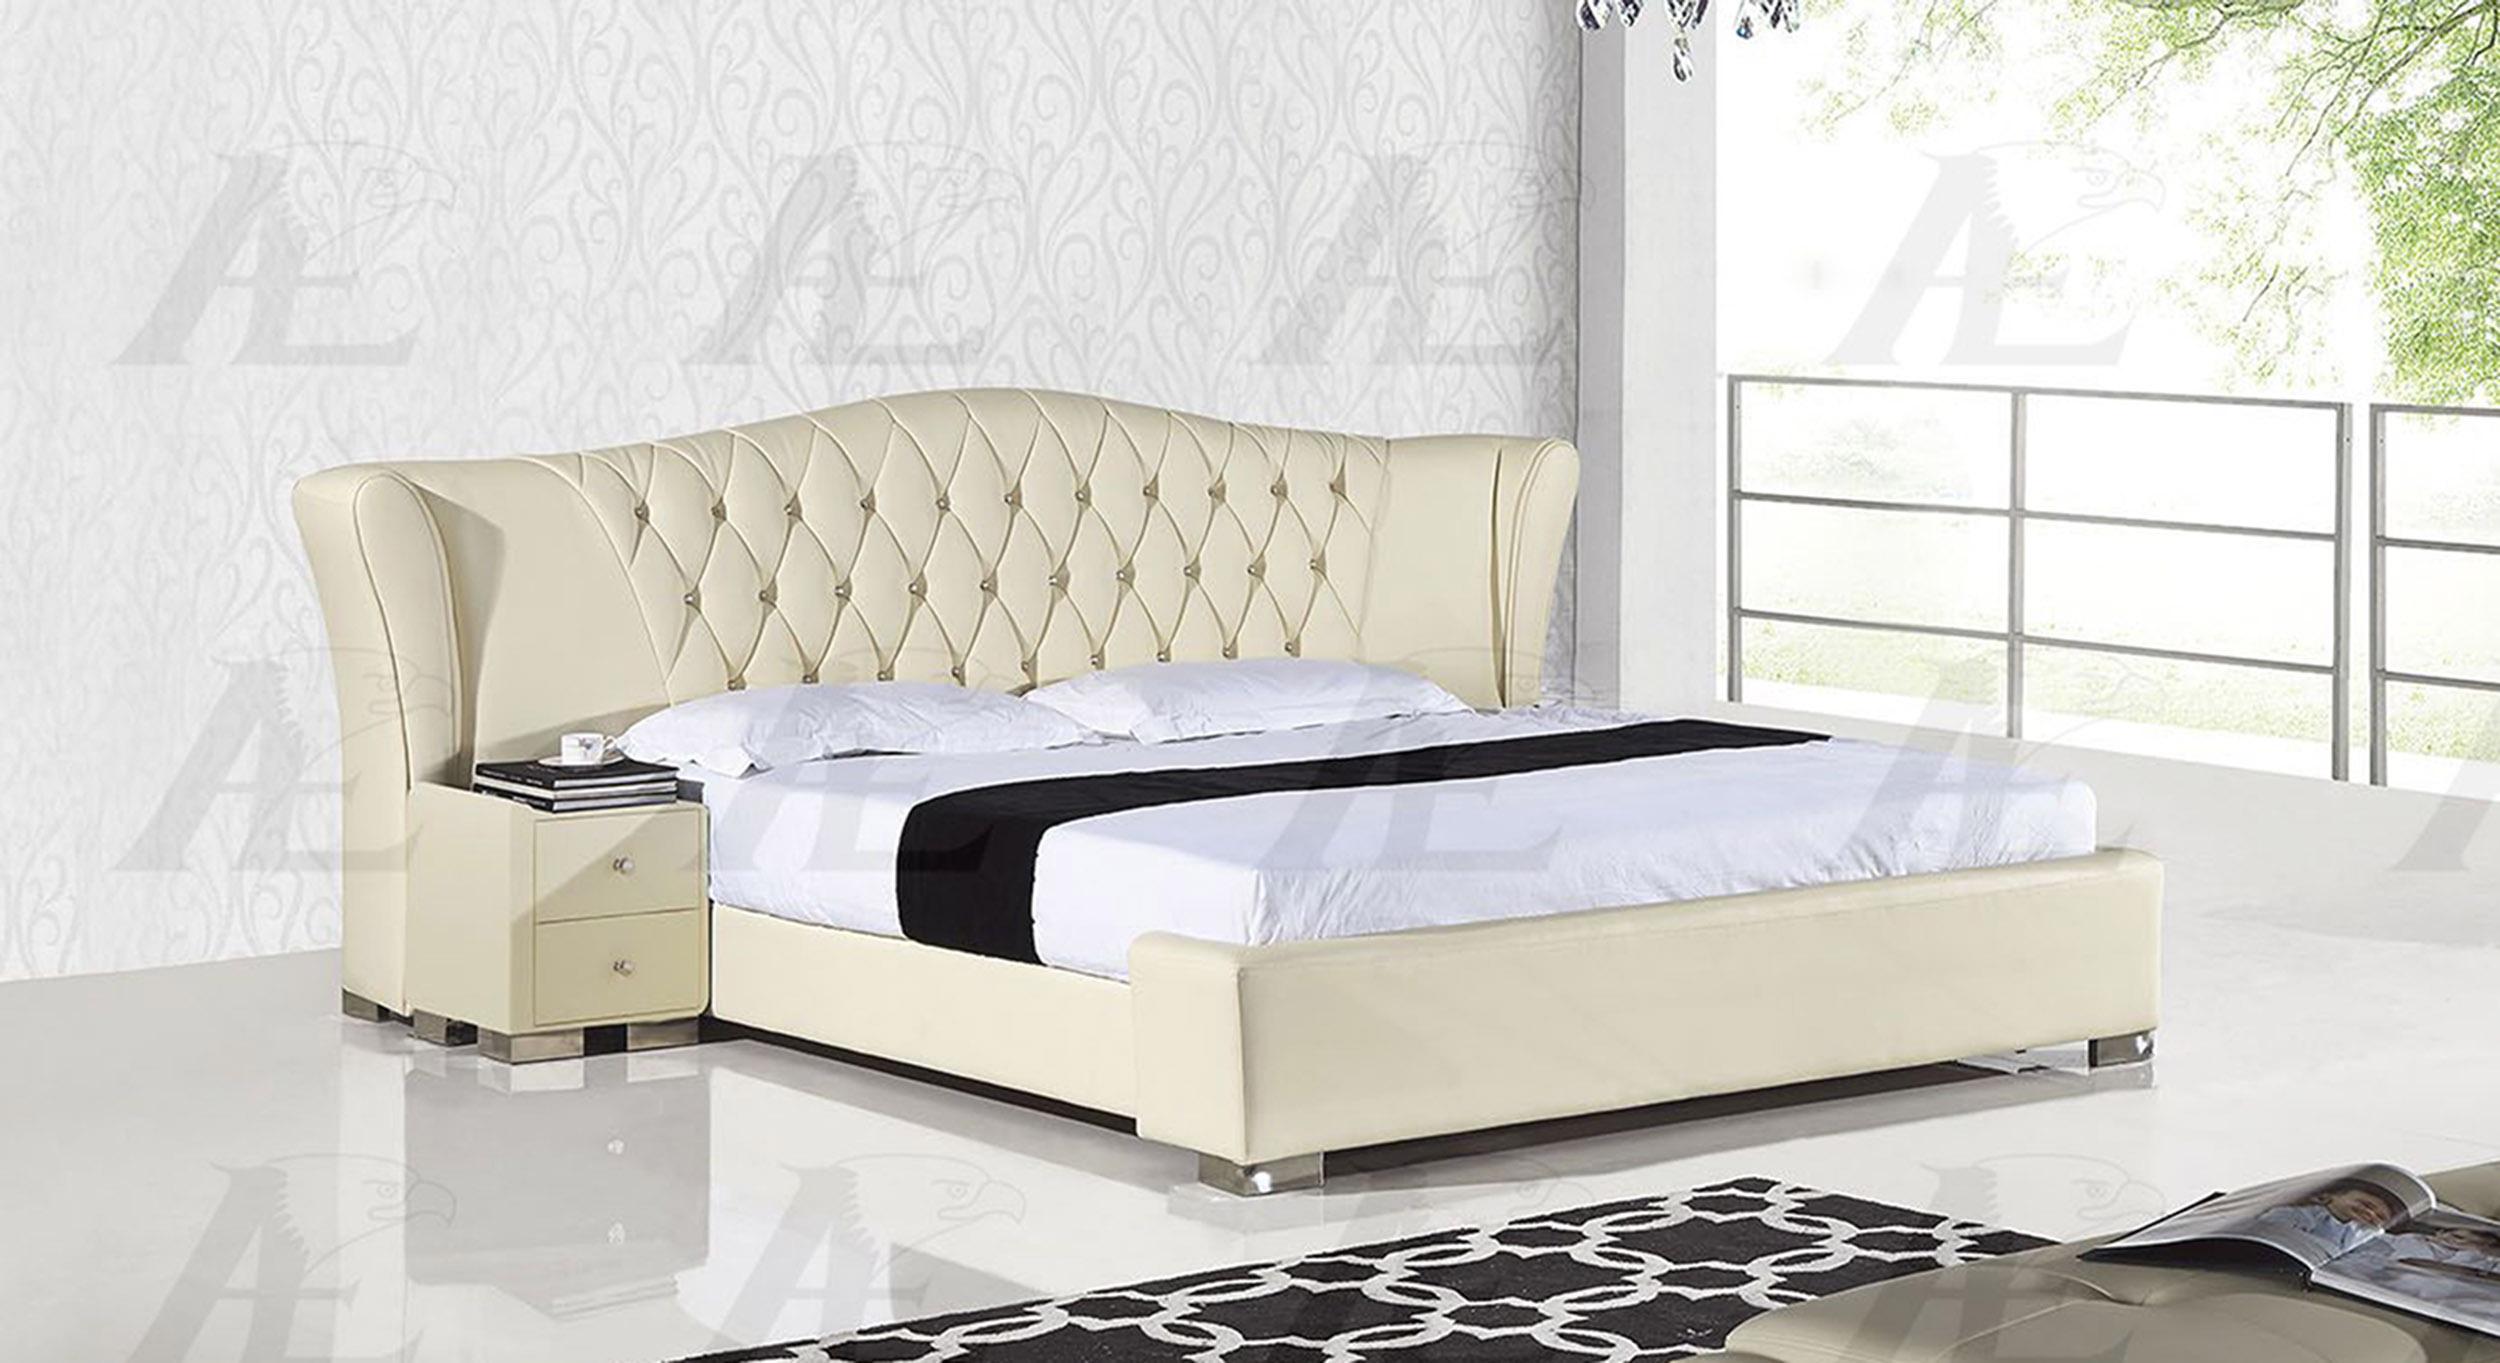 

    
Cream PU Cal King Size Bed & 2 Nightstands Set 3Pcs American Eagle B-D028
